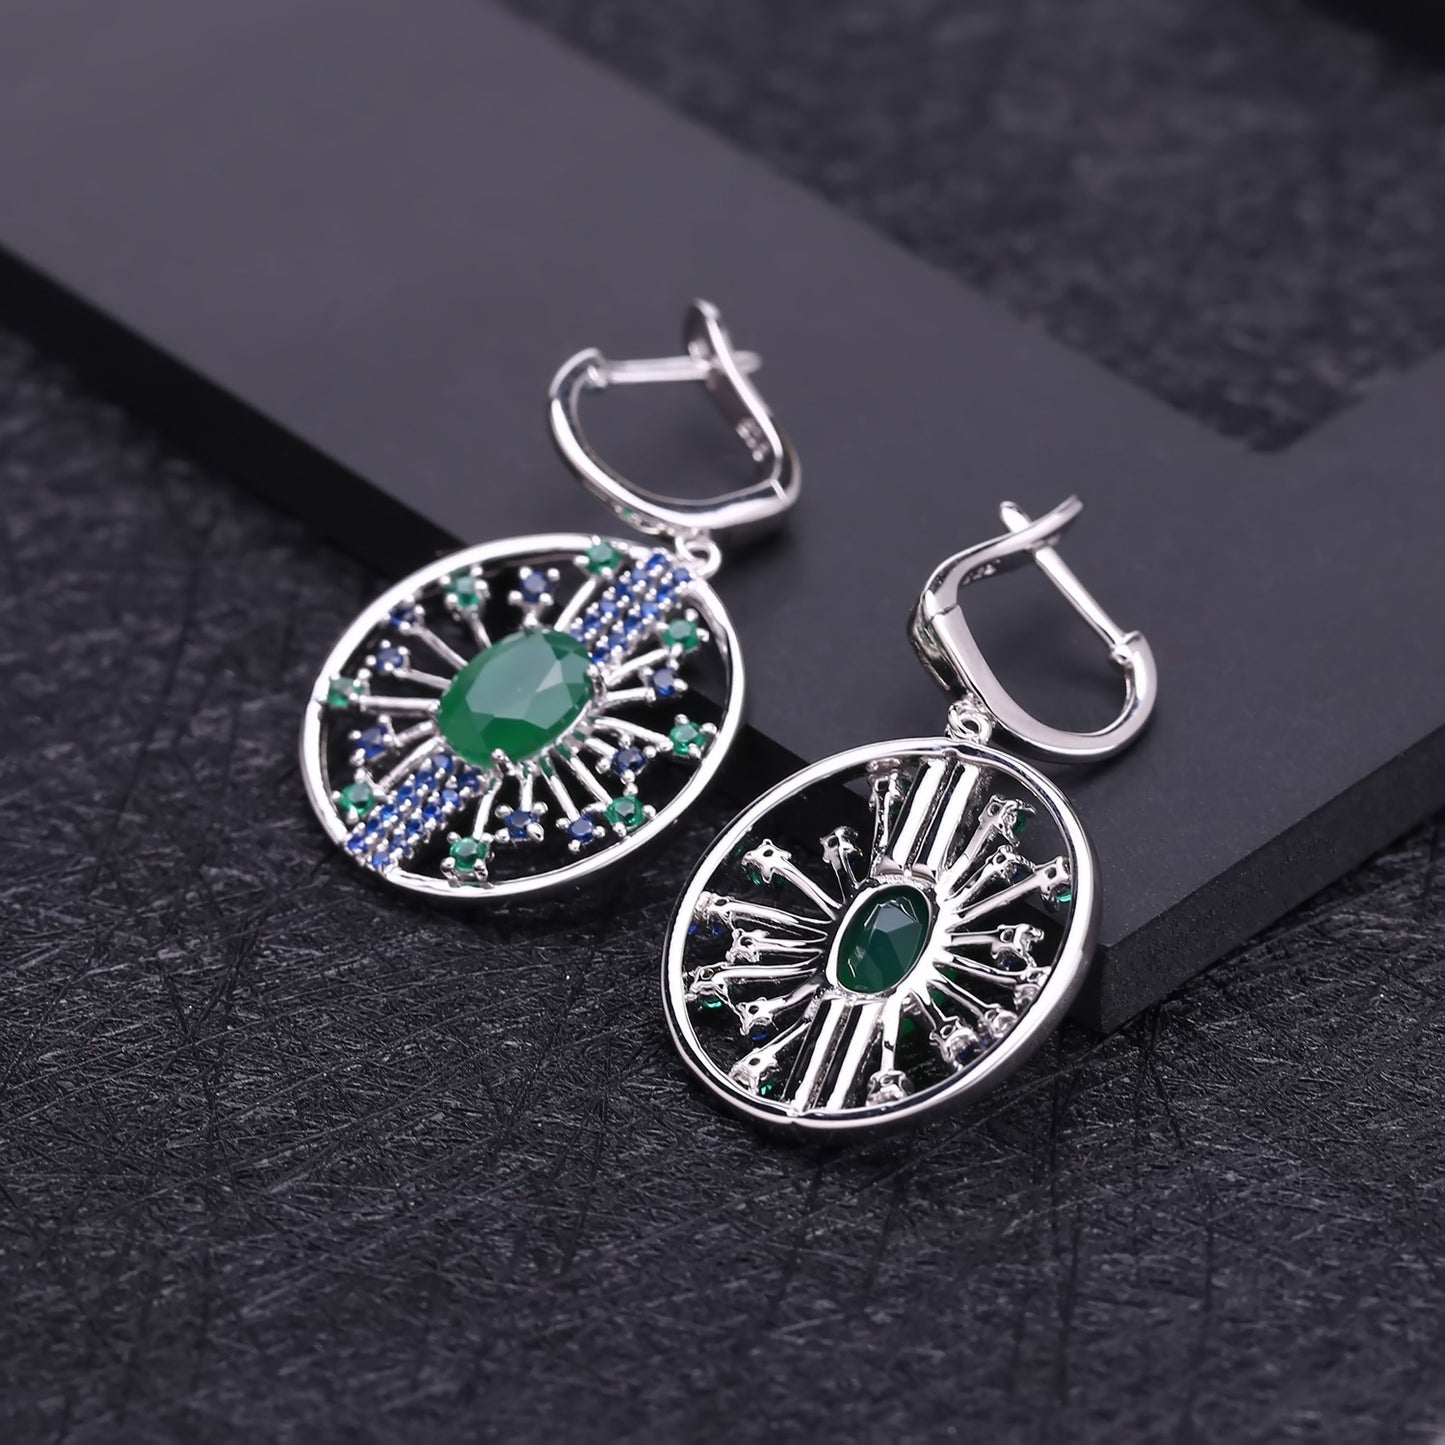 Luxury Fashion Design Inlaid Green Agate Circle Sterling Silver Drop Earrings for Women